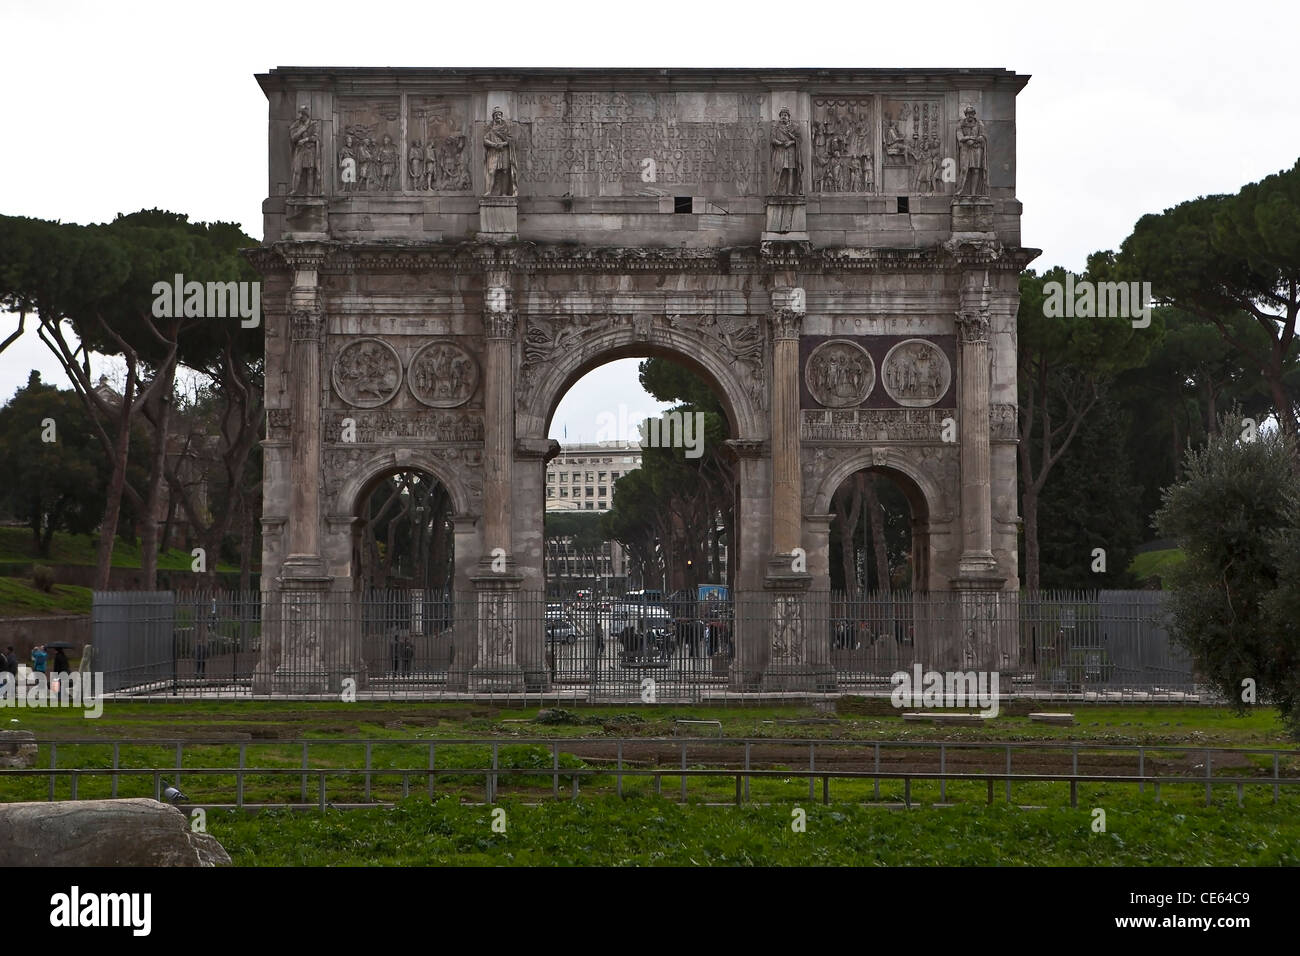 The Arch of Constantine is a three-doors arch next to the Colosseum in Rome, Lazio, Italy. Stock Photo